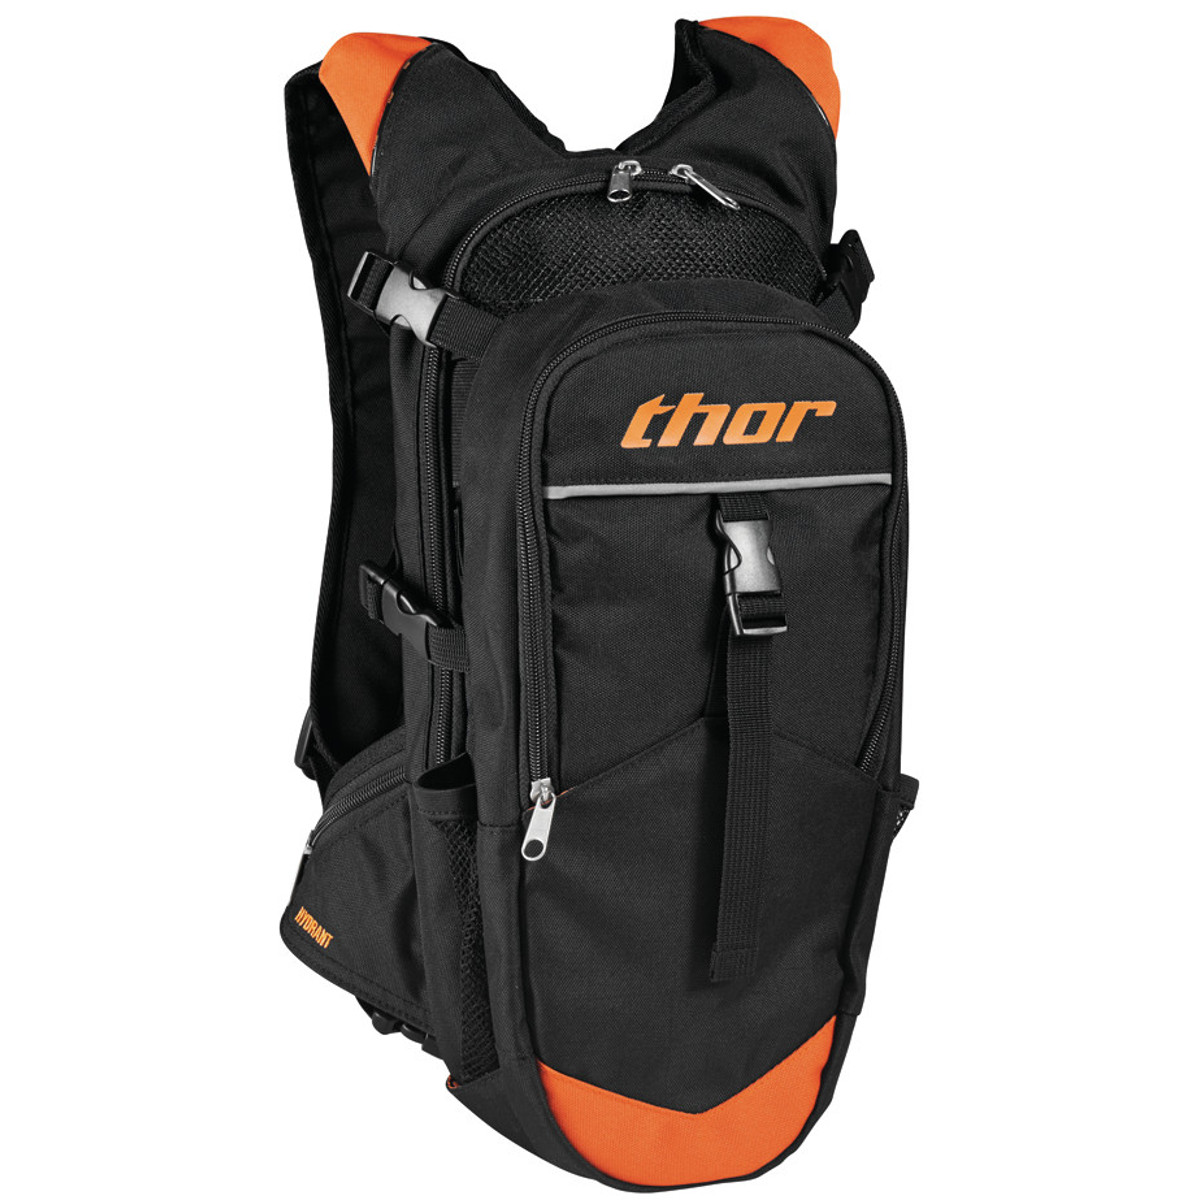 Thor Backpack with Hydration System Compartment Hydrant Black/Orange